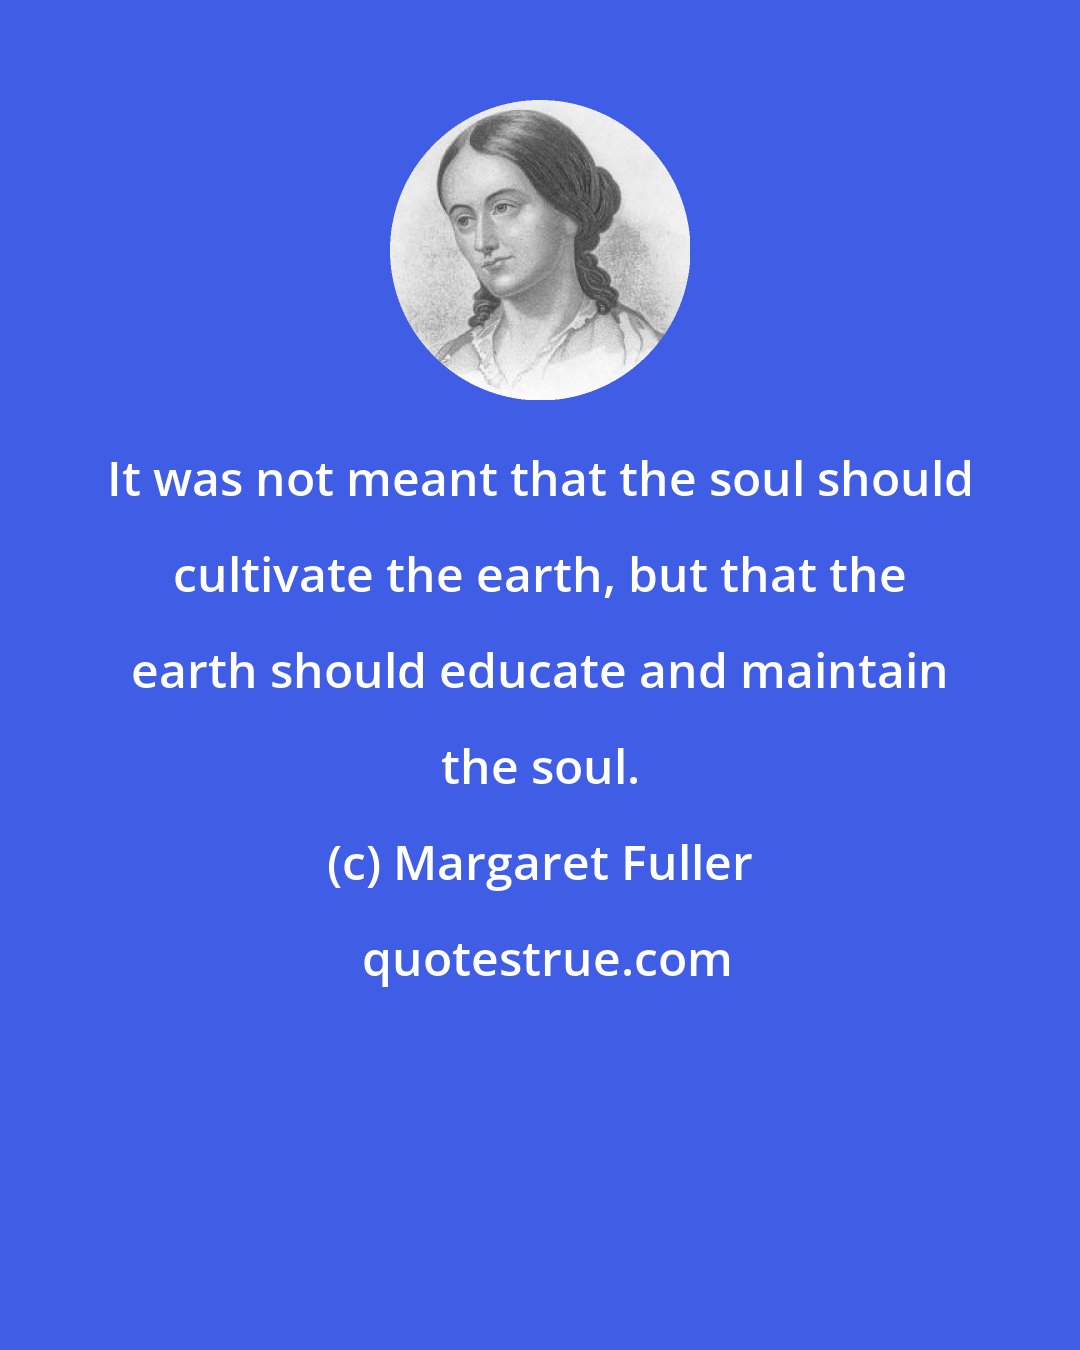 Margaret Fuller: It was not meant that the soul should cultivate the earth, but that the earth should educate and maintain the soul.